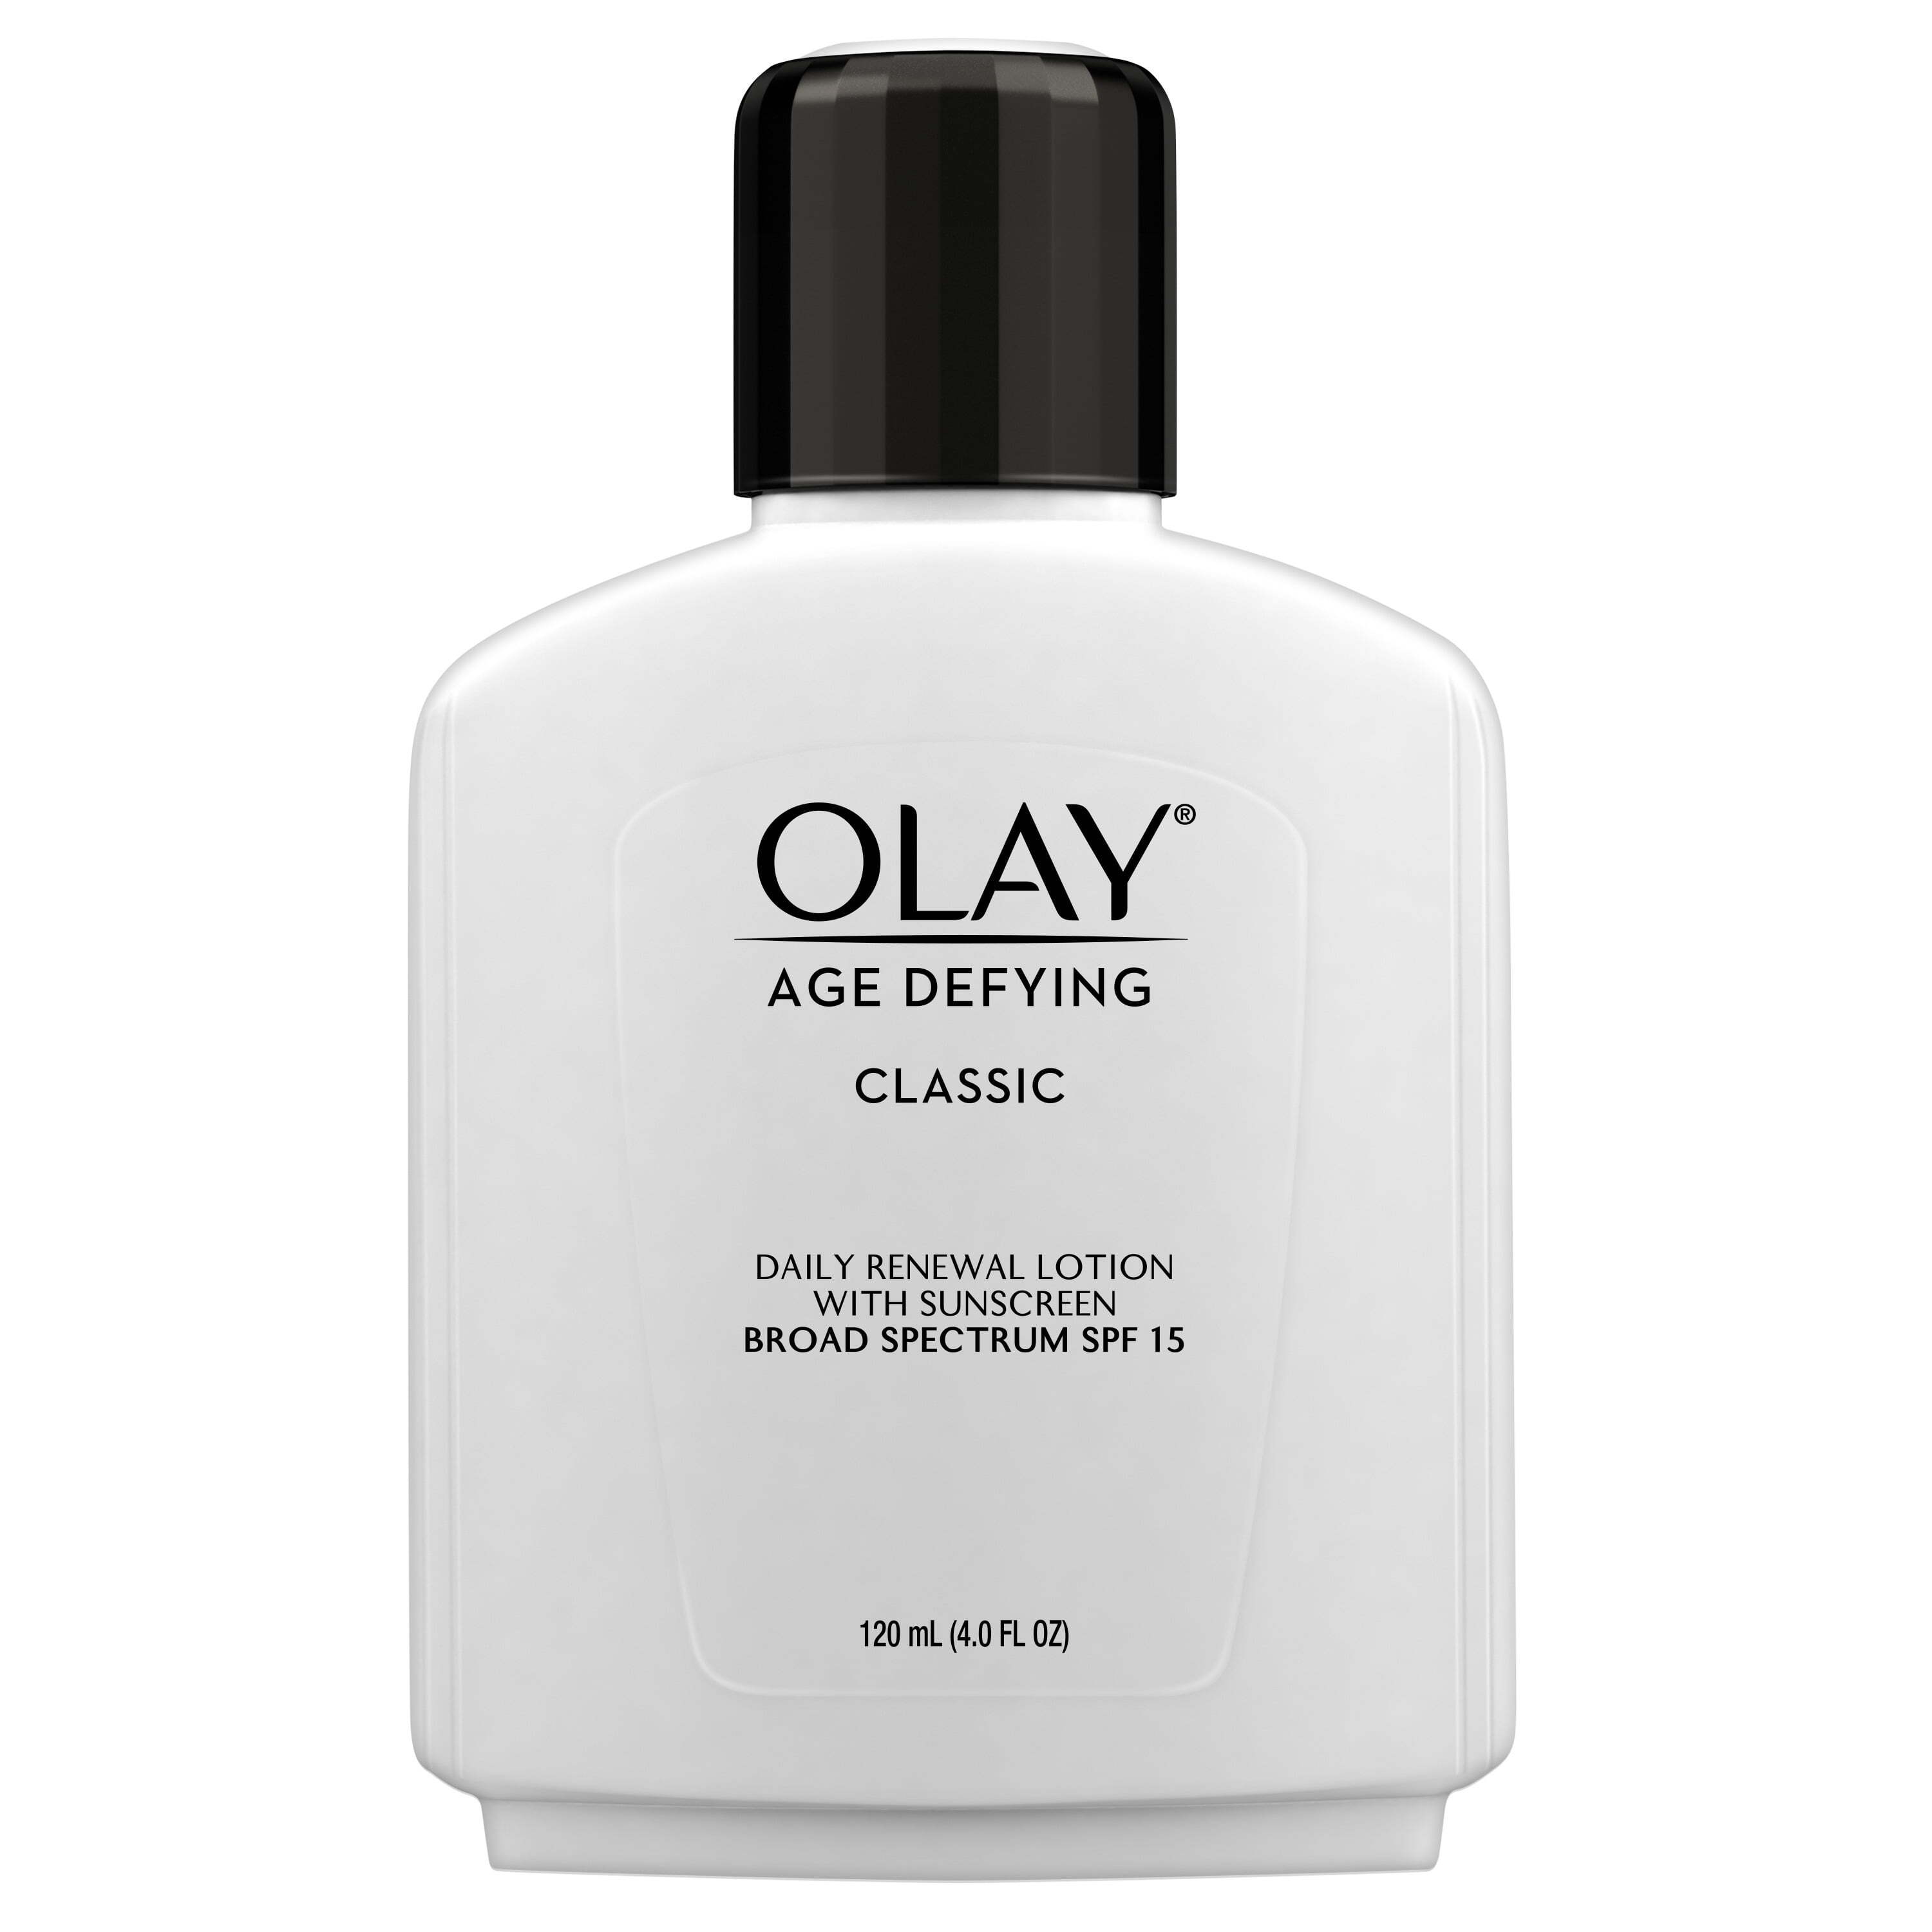 Olay Age Defying Classic Daily Renewal Lotion, Fights Fine Lines & Wrinkles, Normal Skin, SPF 15, 4 fl oz - image 3 of 10